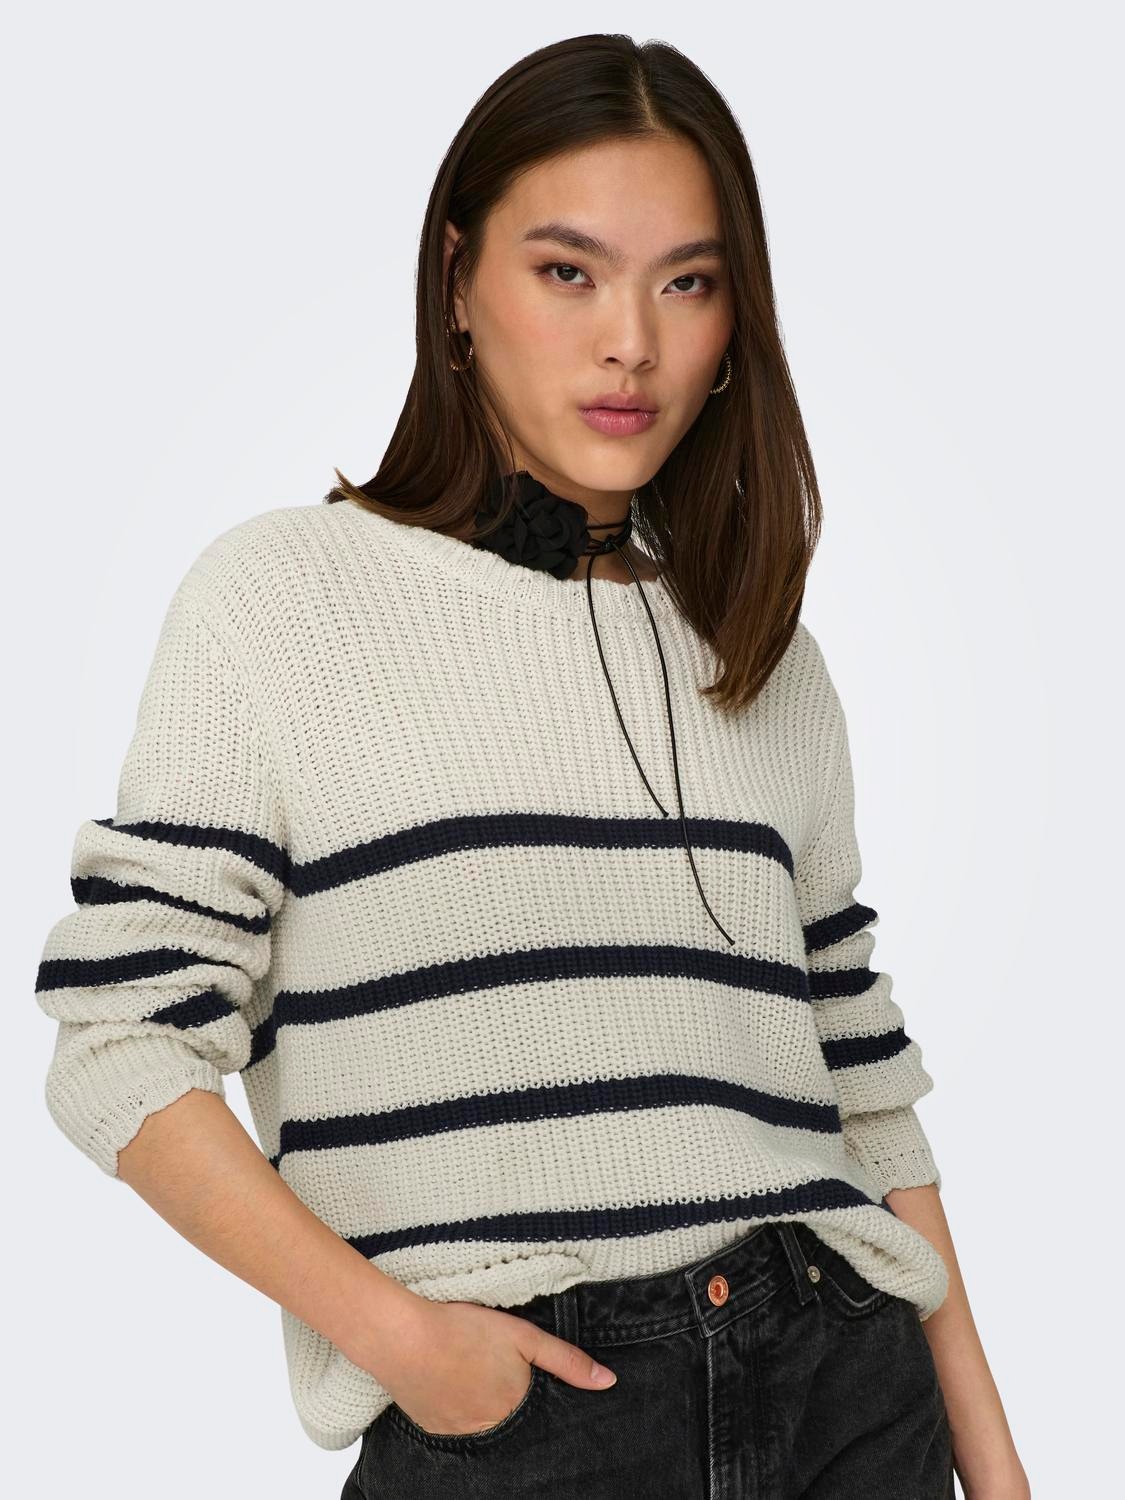 ONLY O-hals Pullover -Pumice Stone - 15279774